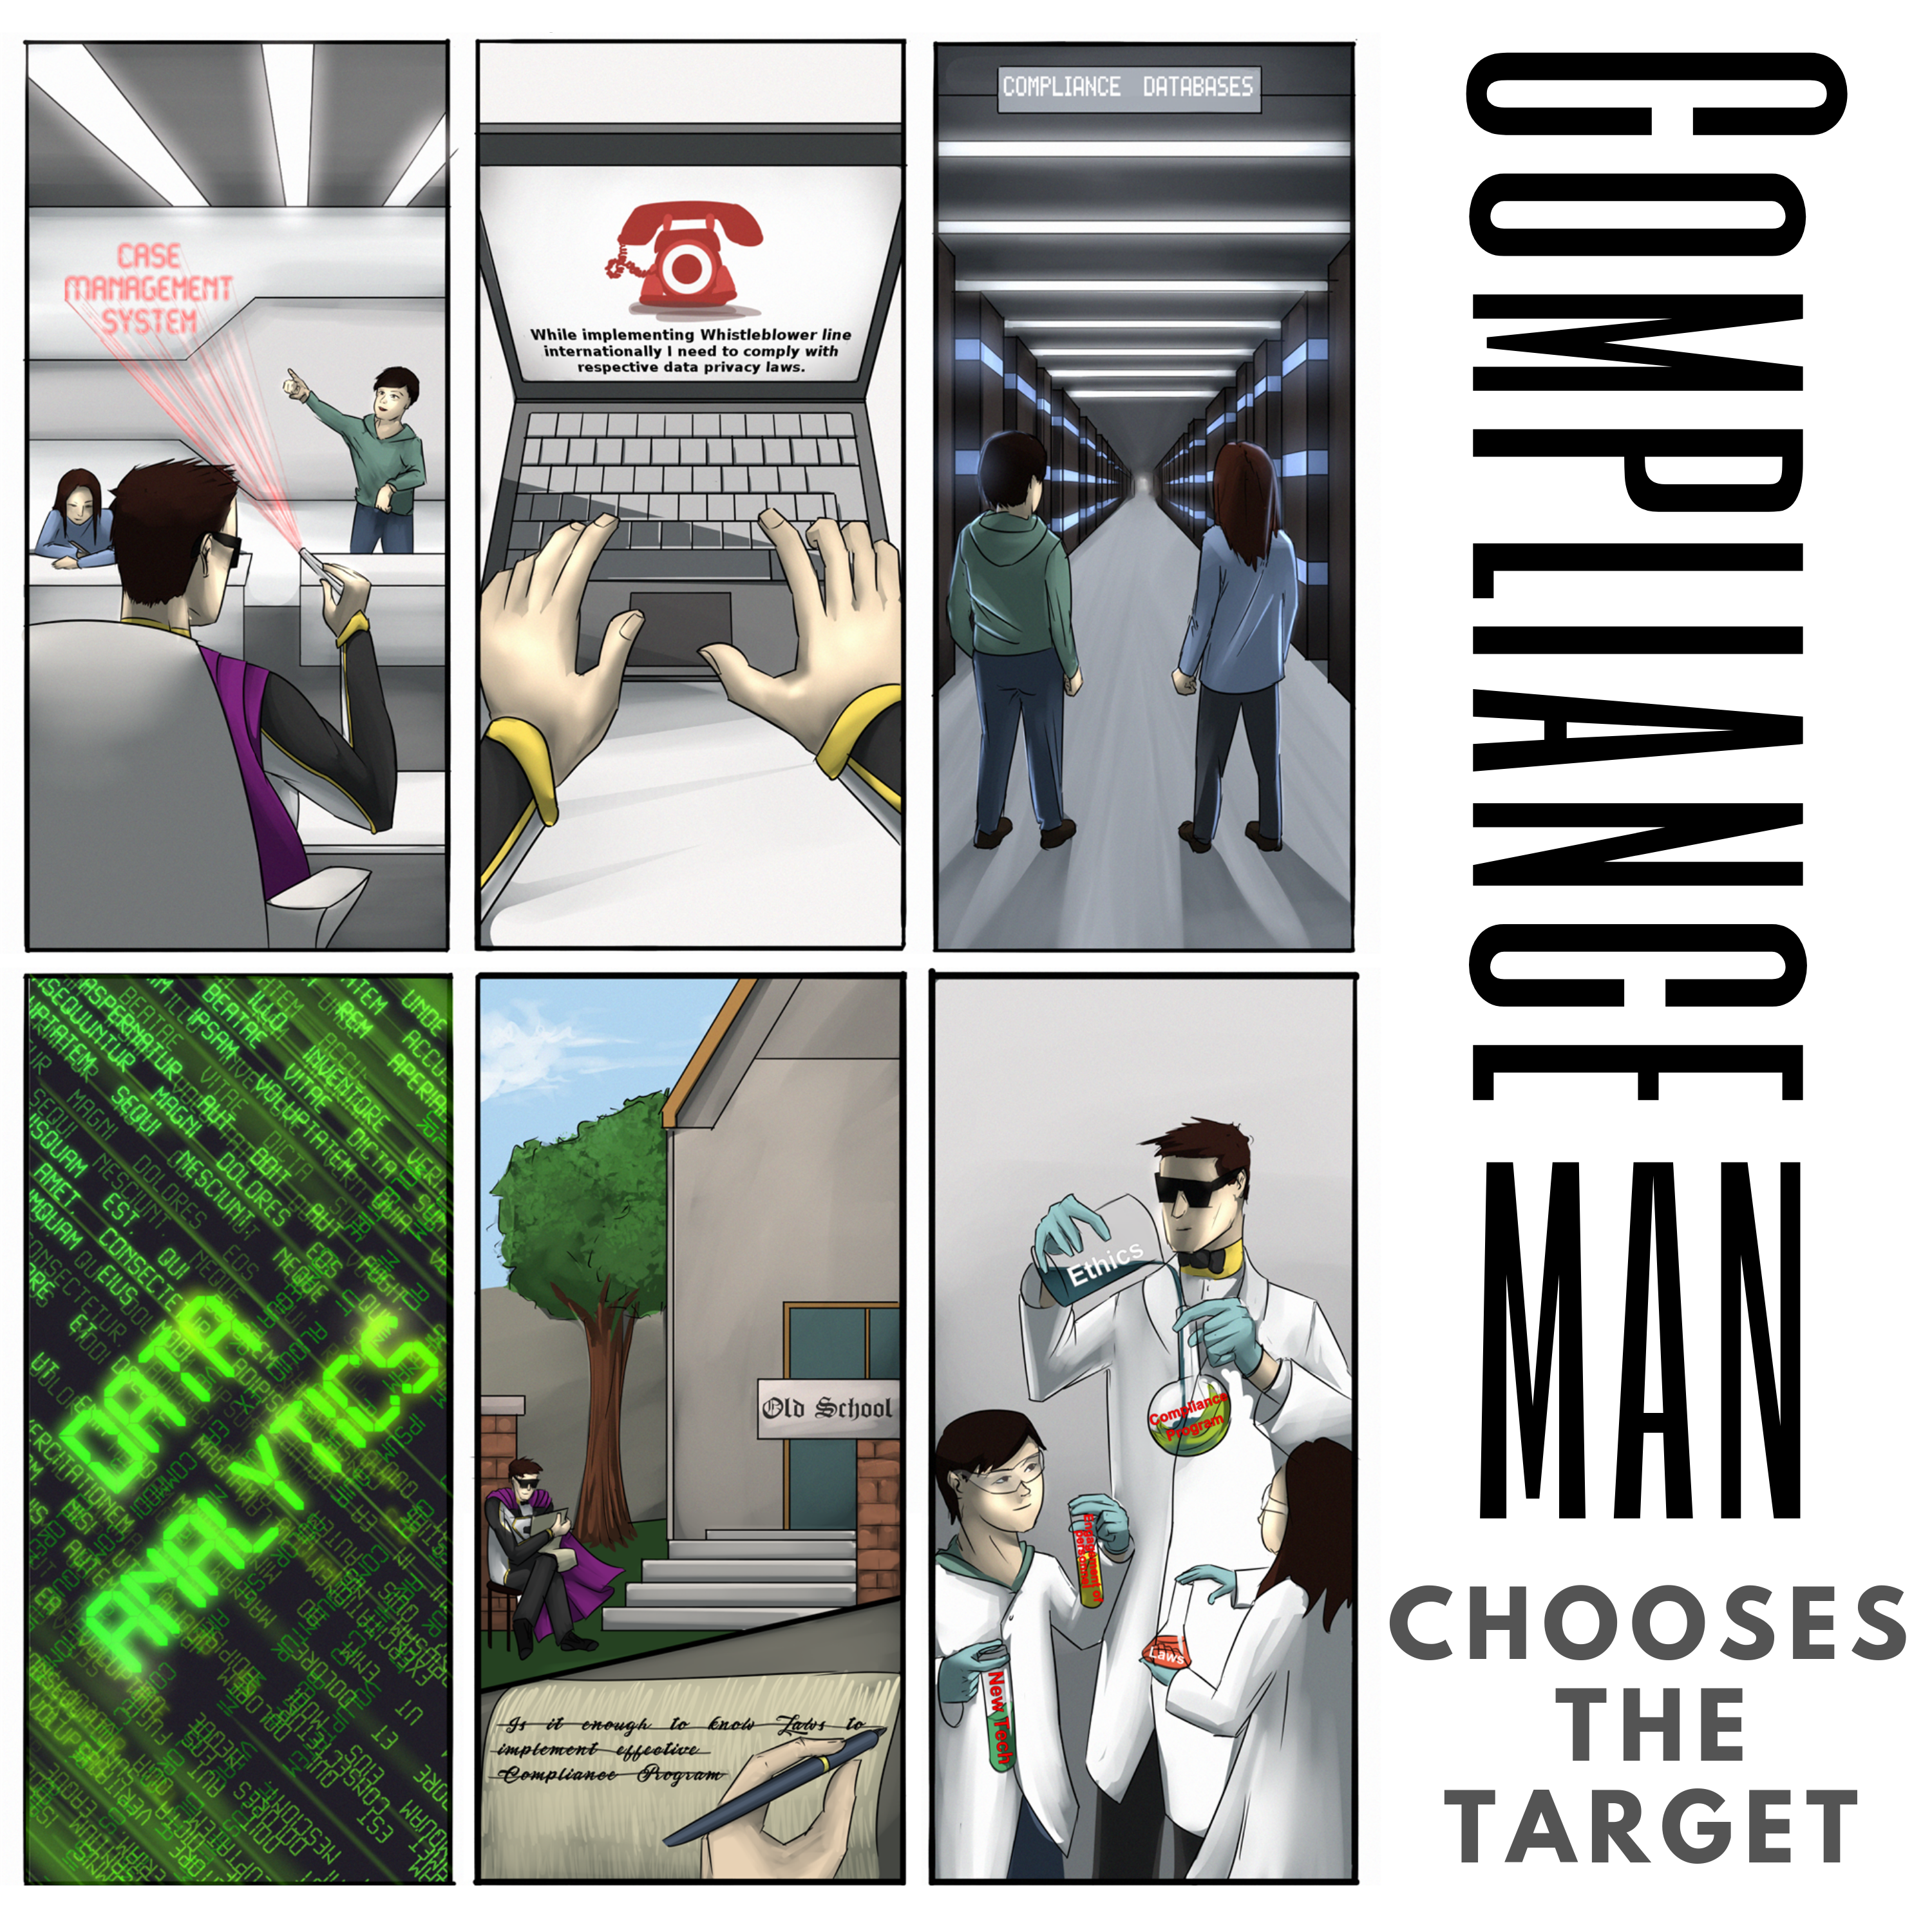 Compliance Man Chooses the Target